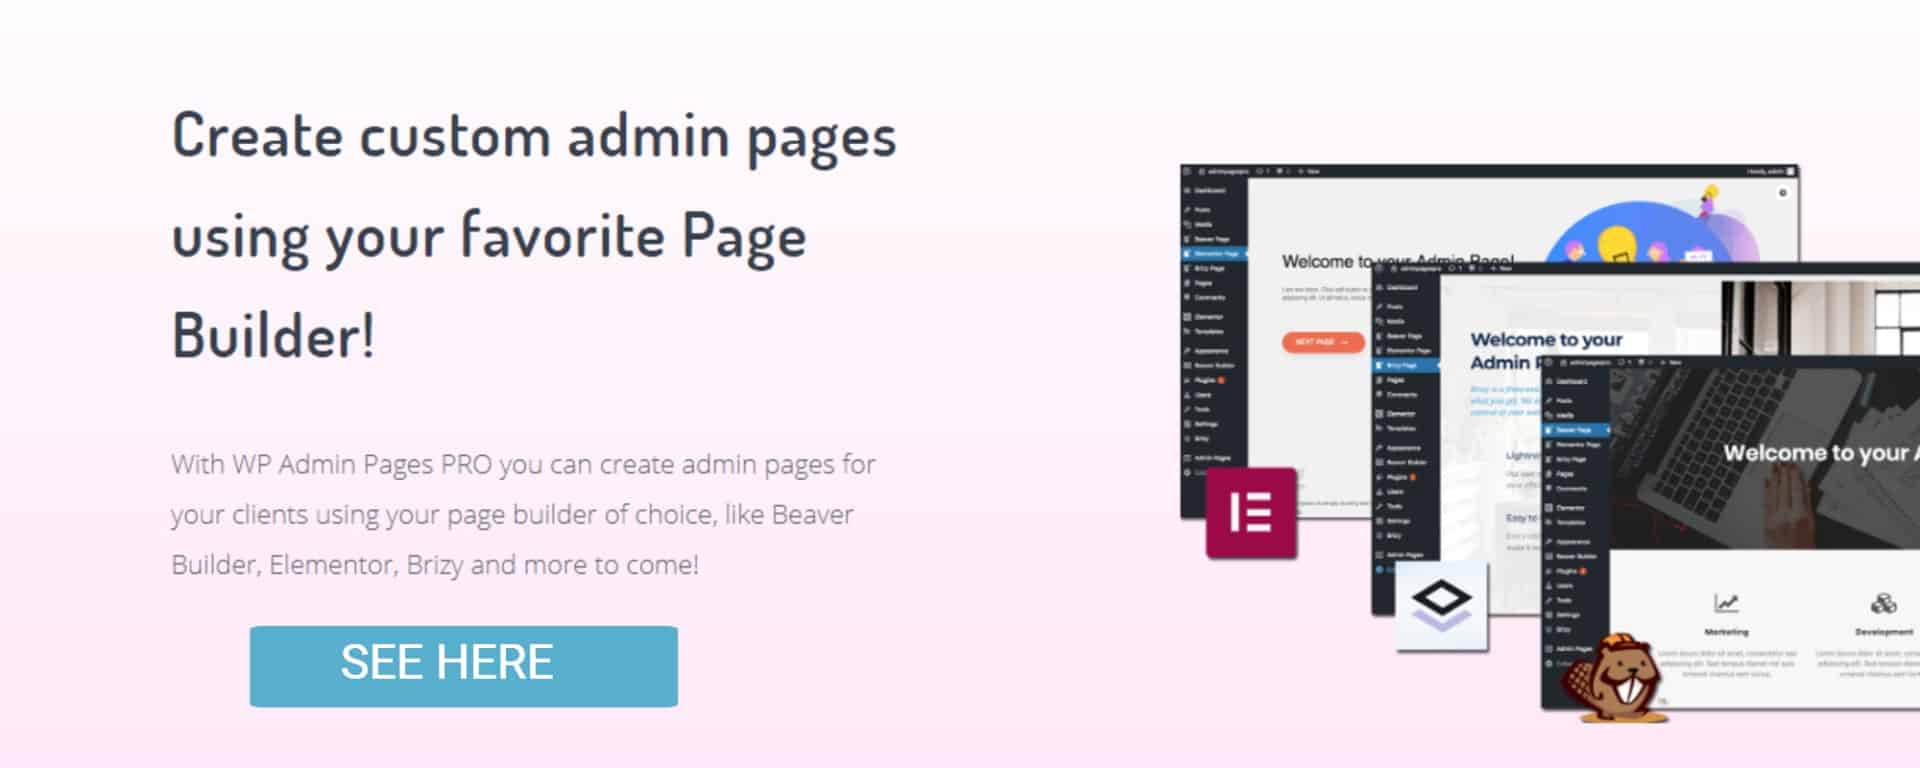 WP Admin Pages Pro Main website